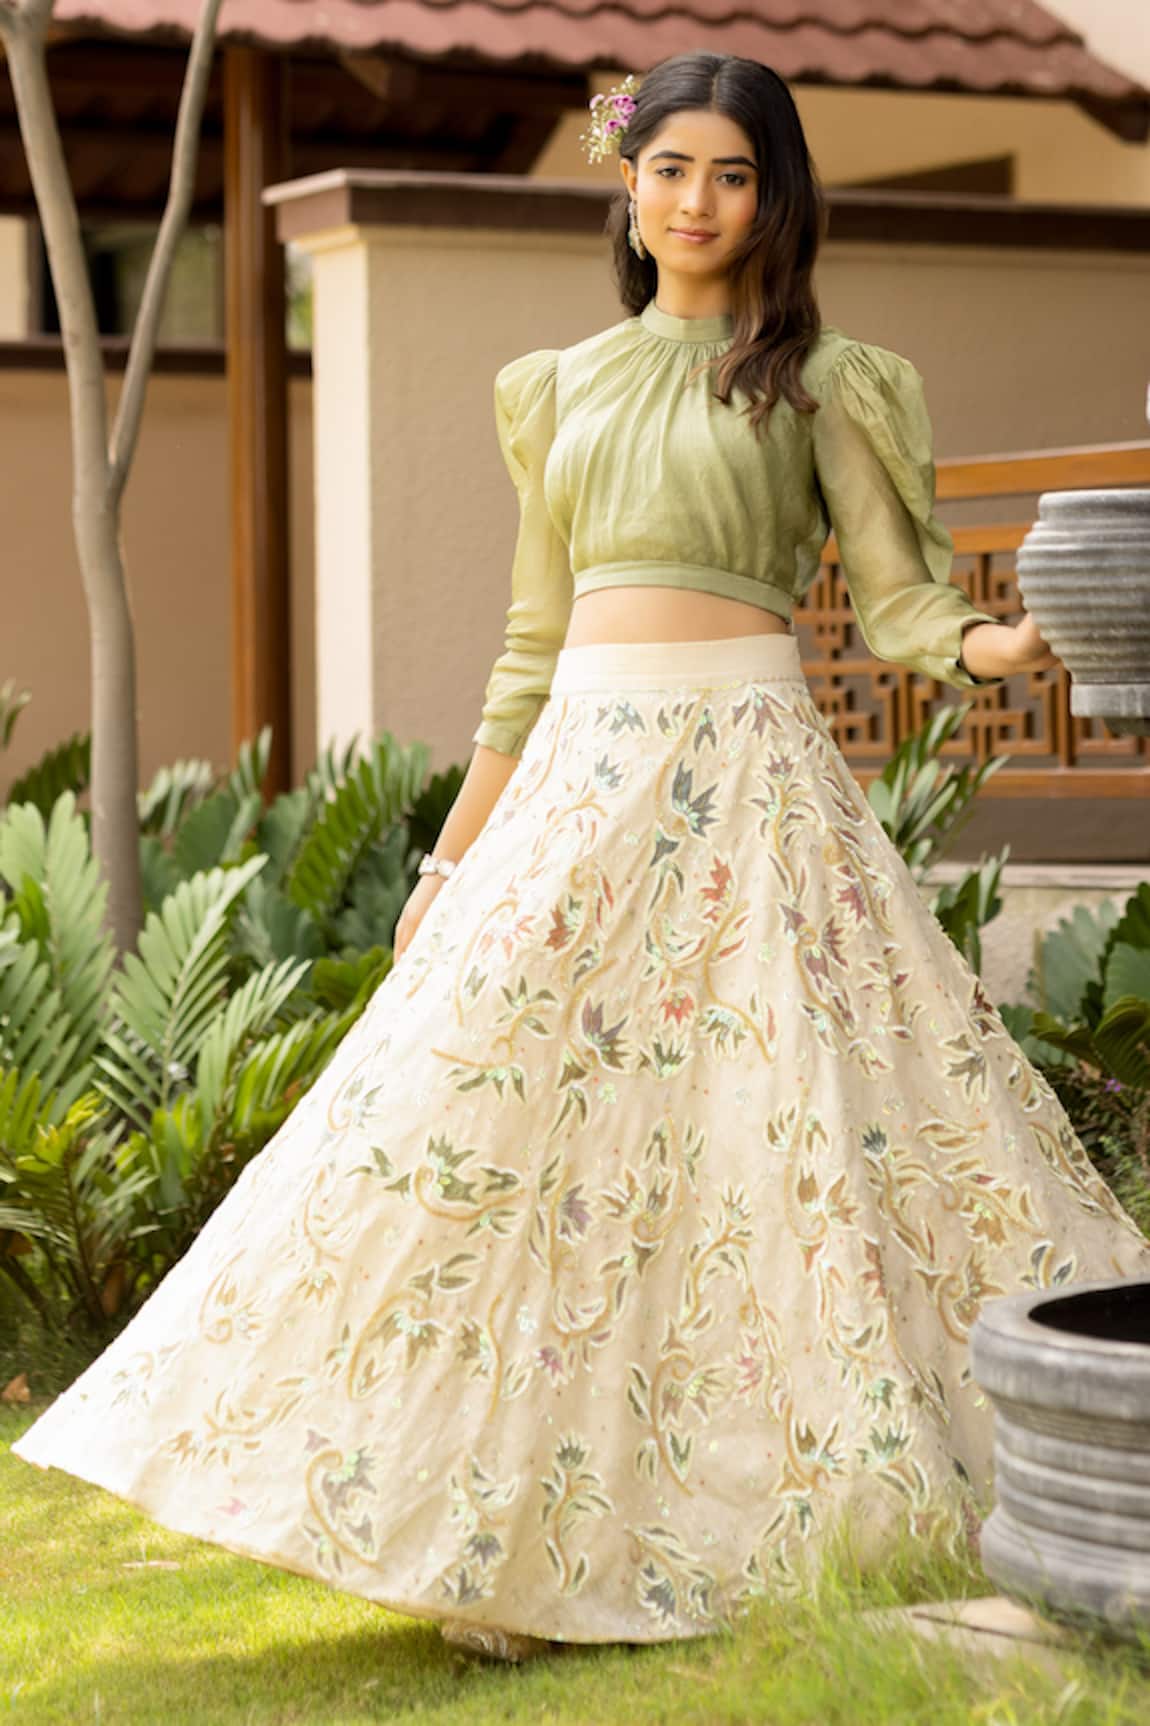 ABSTRACT BY MEGHA JAIN MADAAN Leg Of Mutton Sleeves Crop Top With Boho Fleur Embroidered Skirt